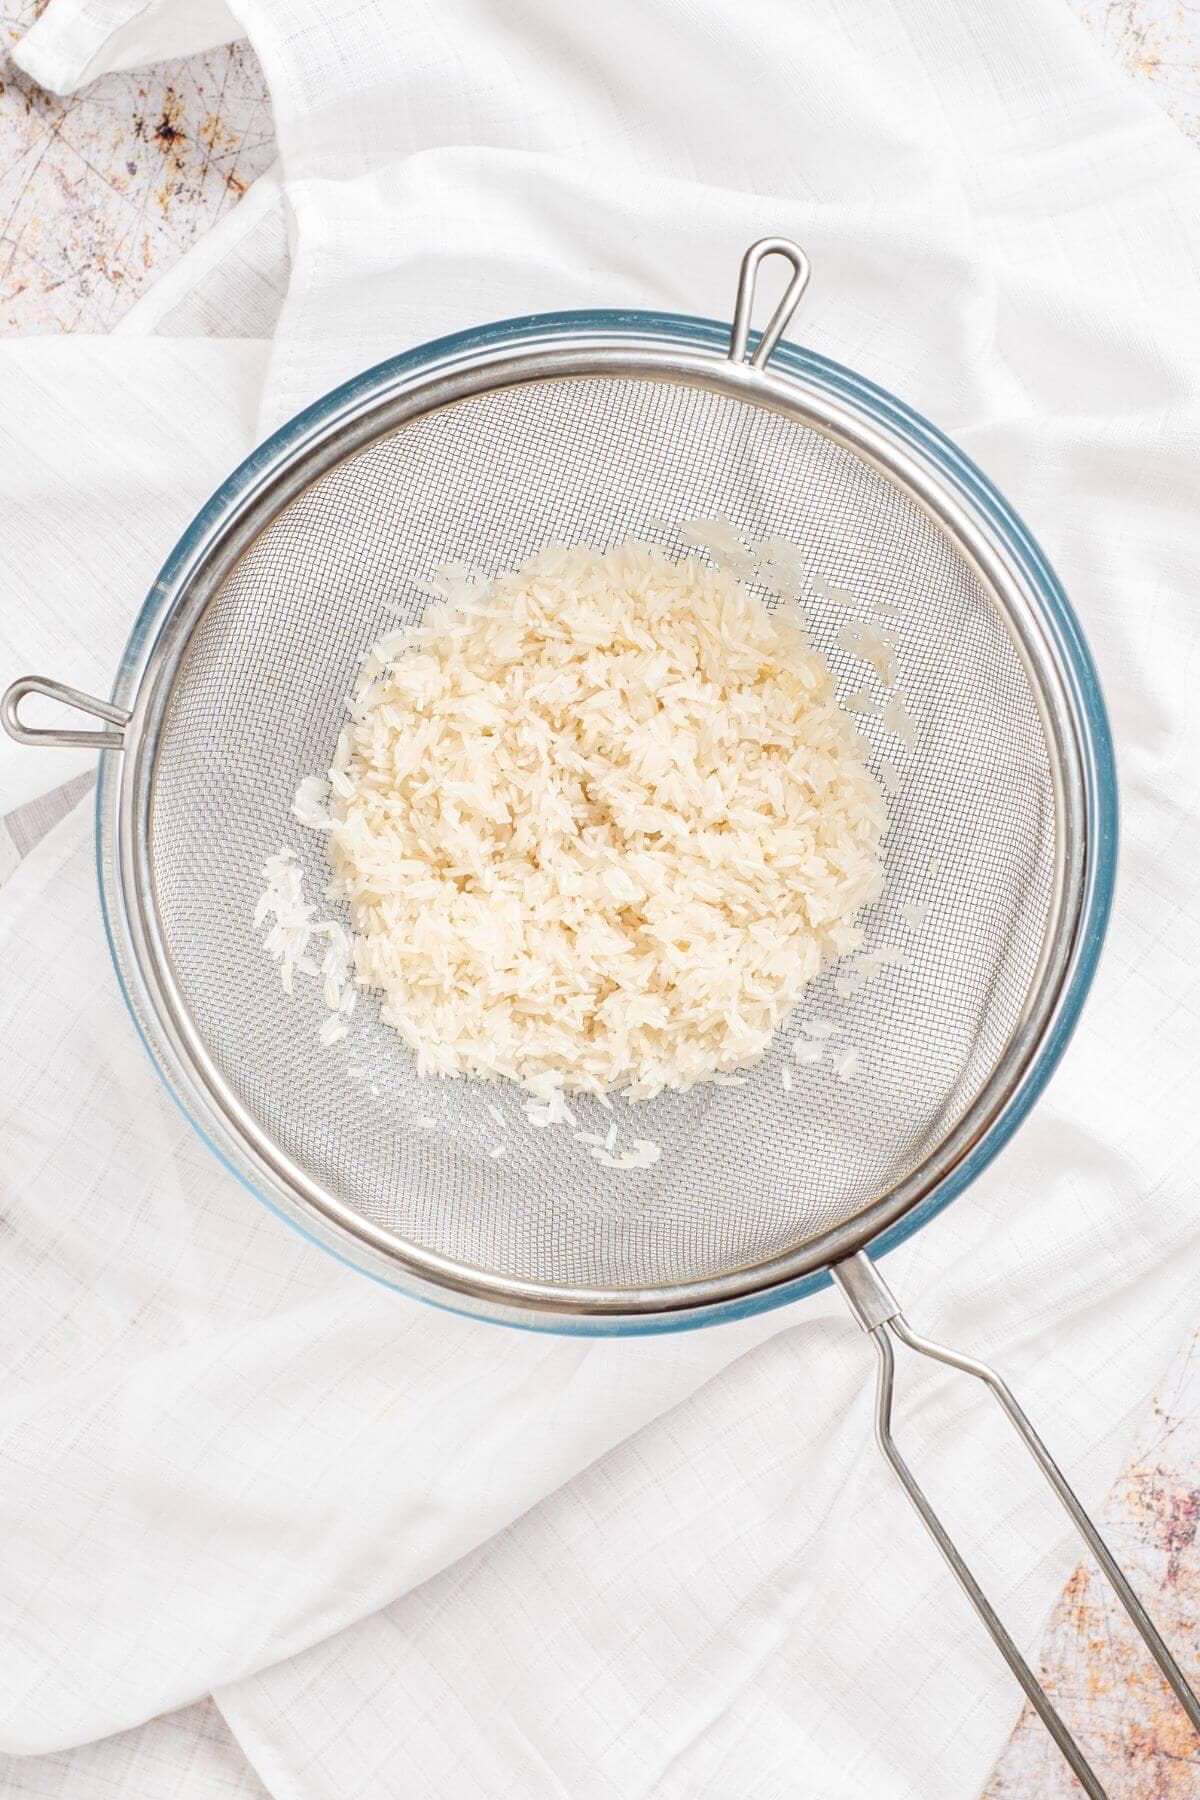 Rice in a strainer on a white cloth.